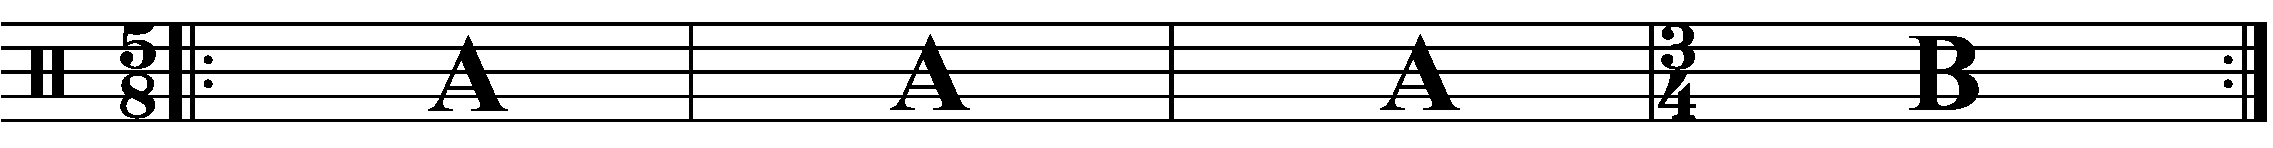 A four bar phrase using 3/4 for the 'B' section.